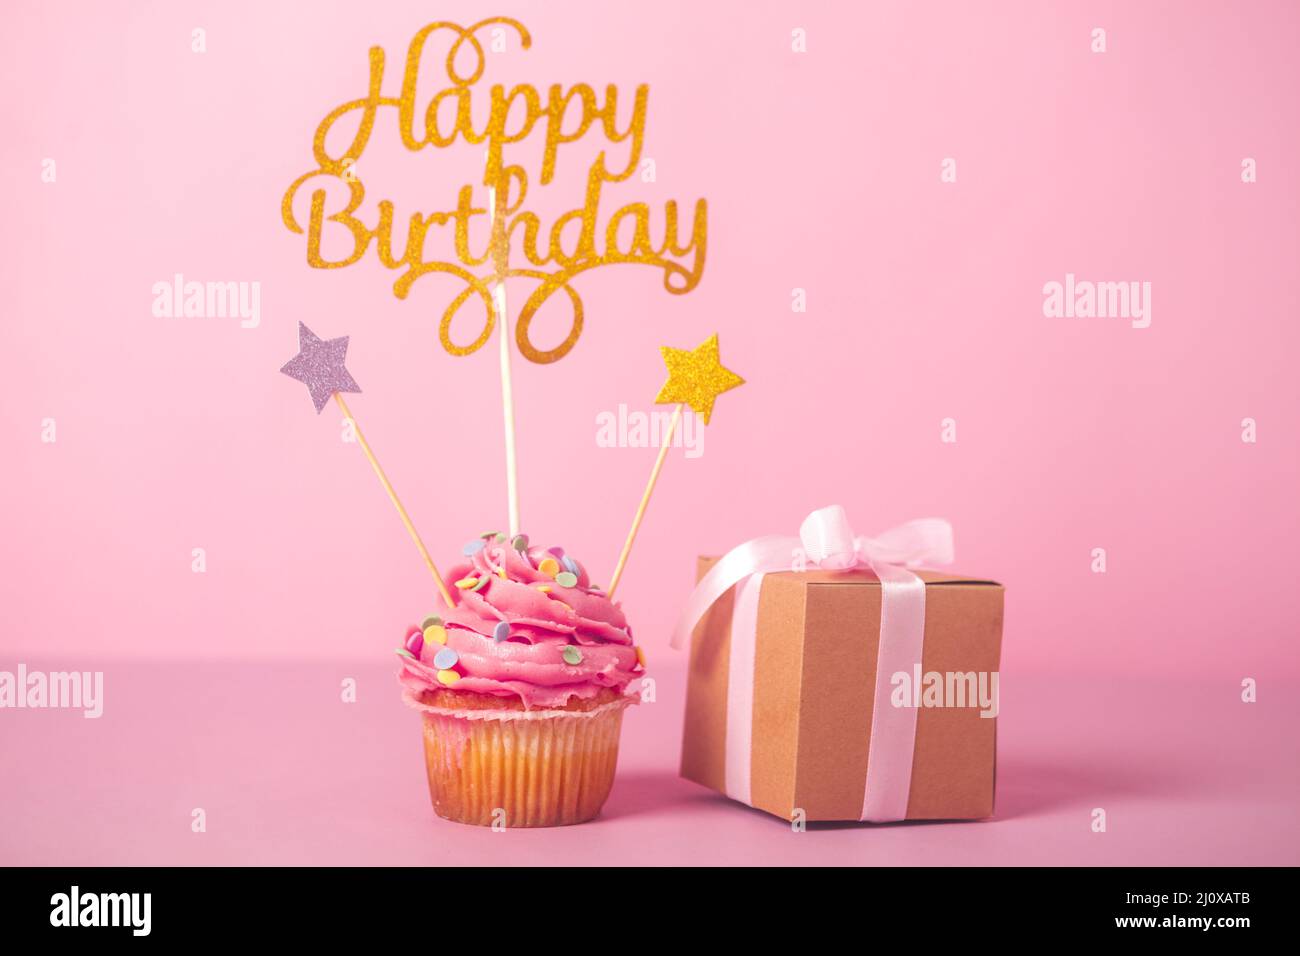 787,191 Birthday Cake Background Images, Stock Photos & Vectors |  Shutterstock